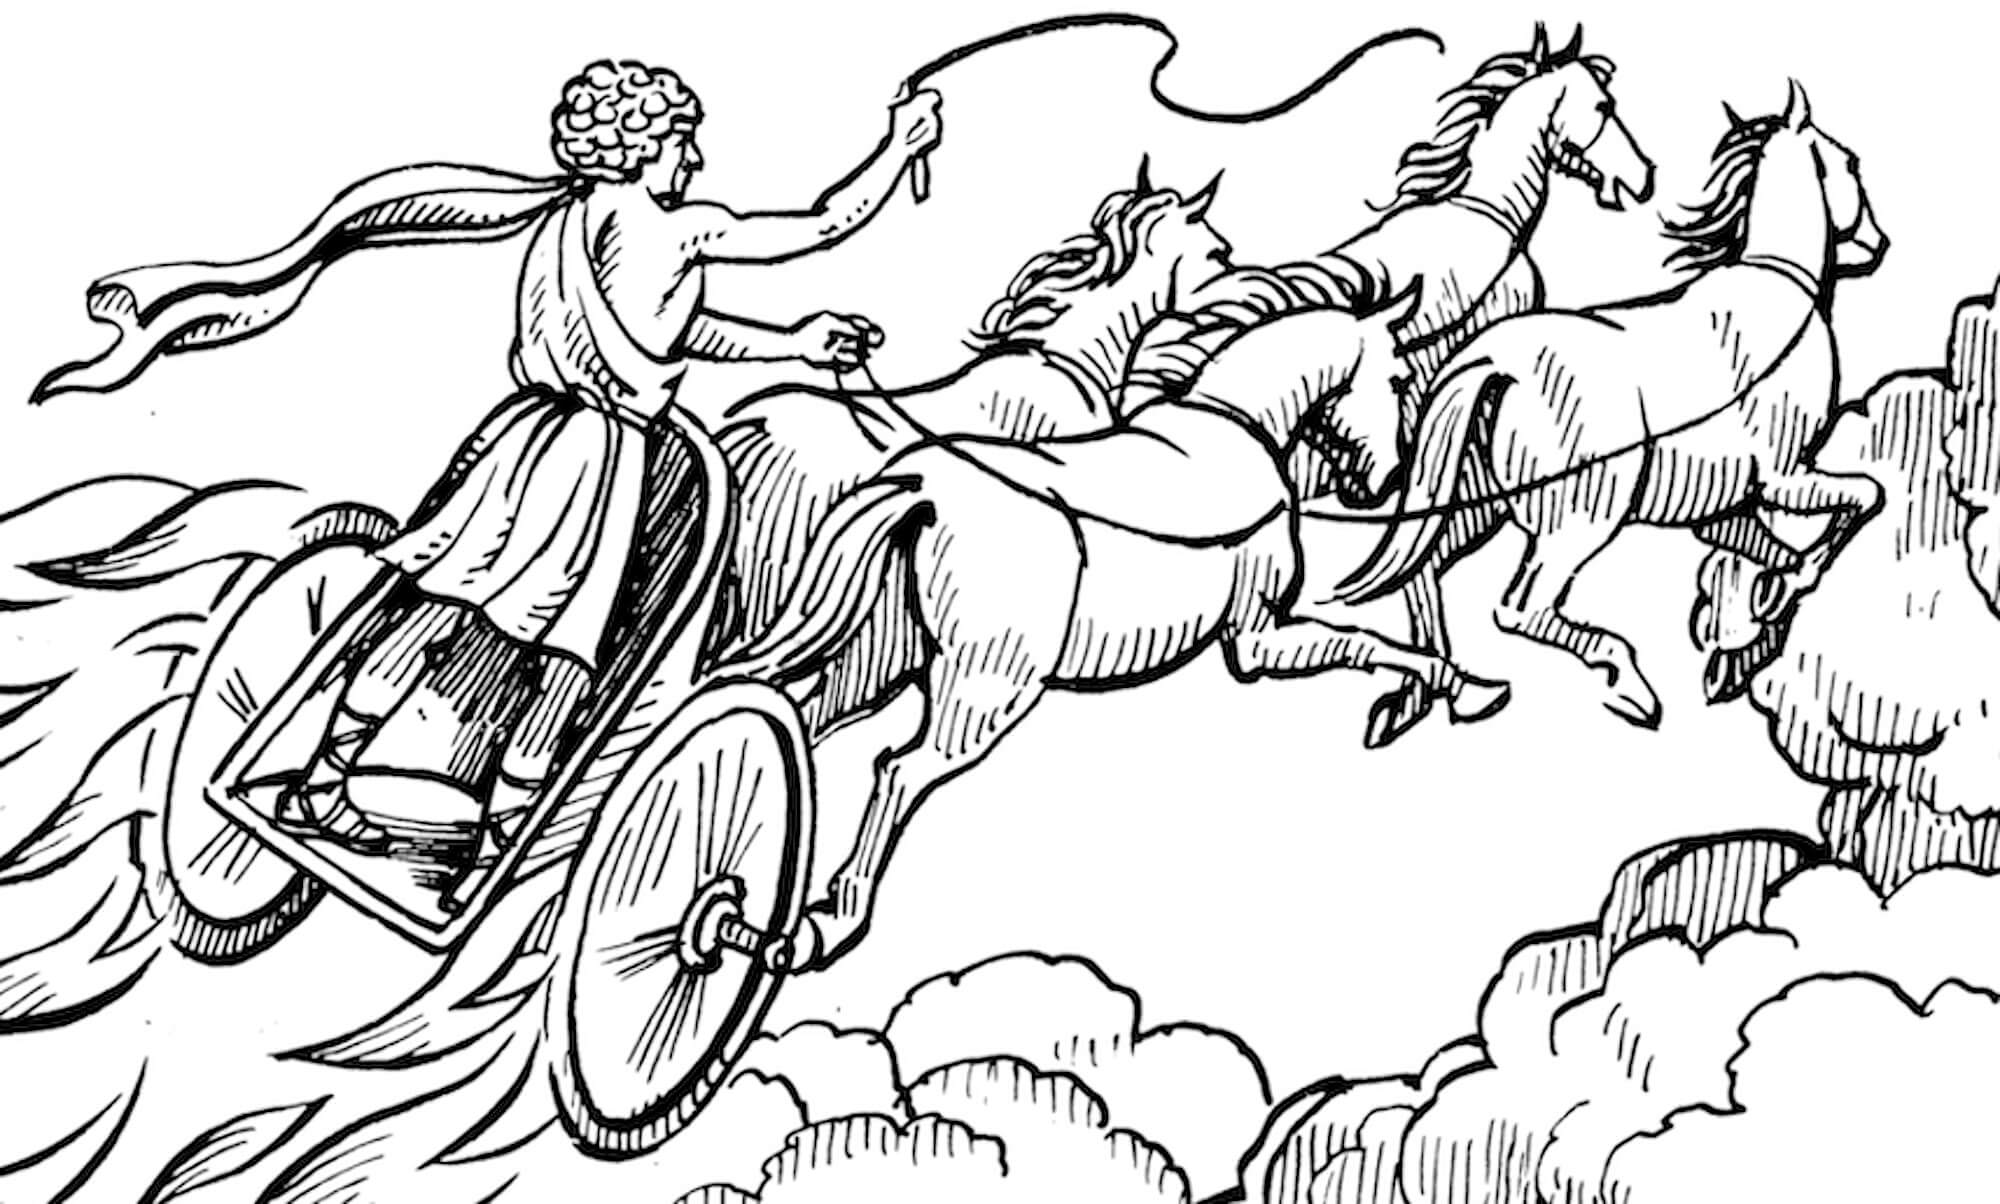 a sketch of Helios riding in a horse-drawn chariot through the sky